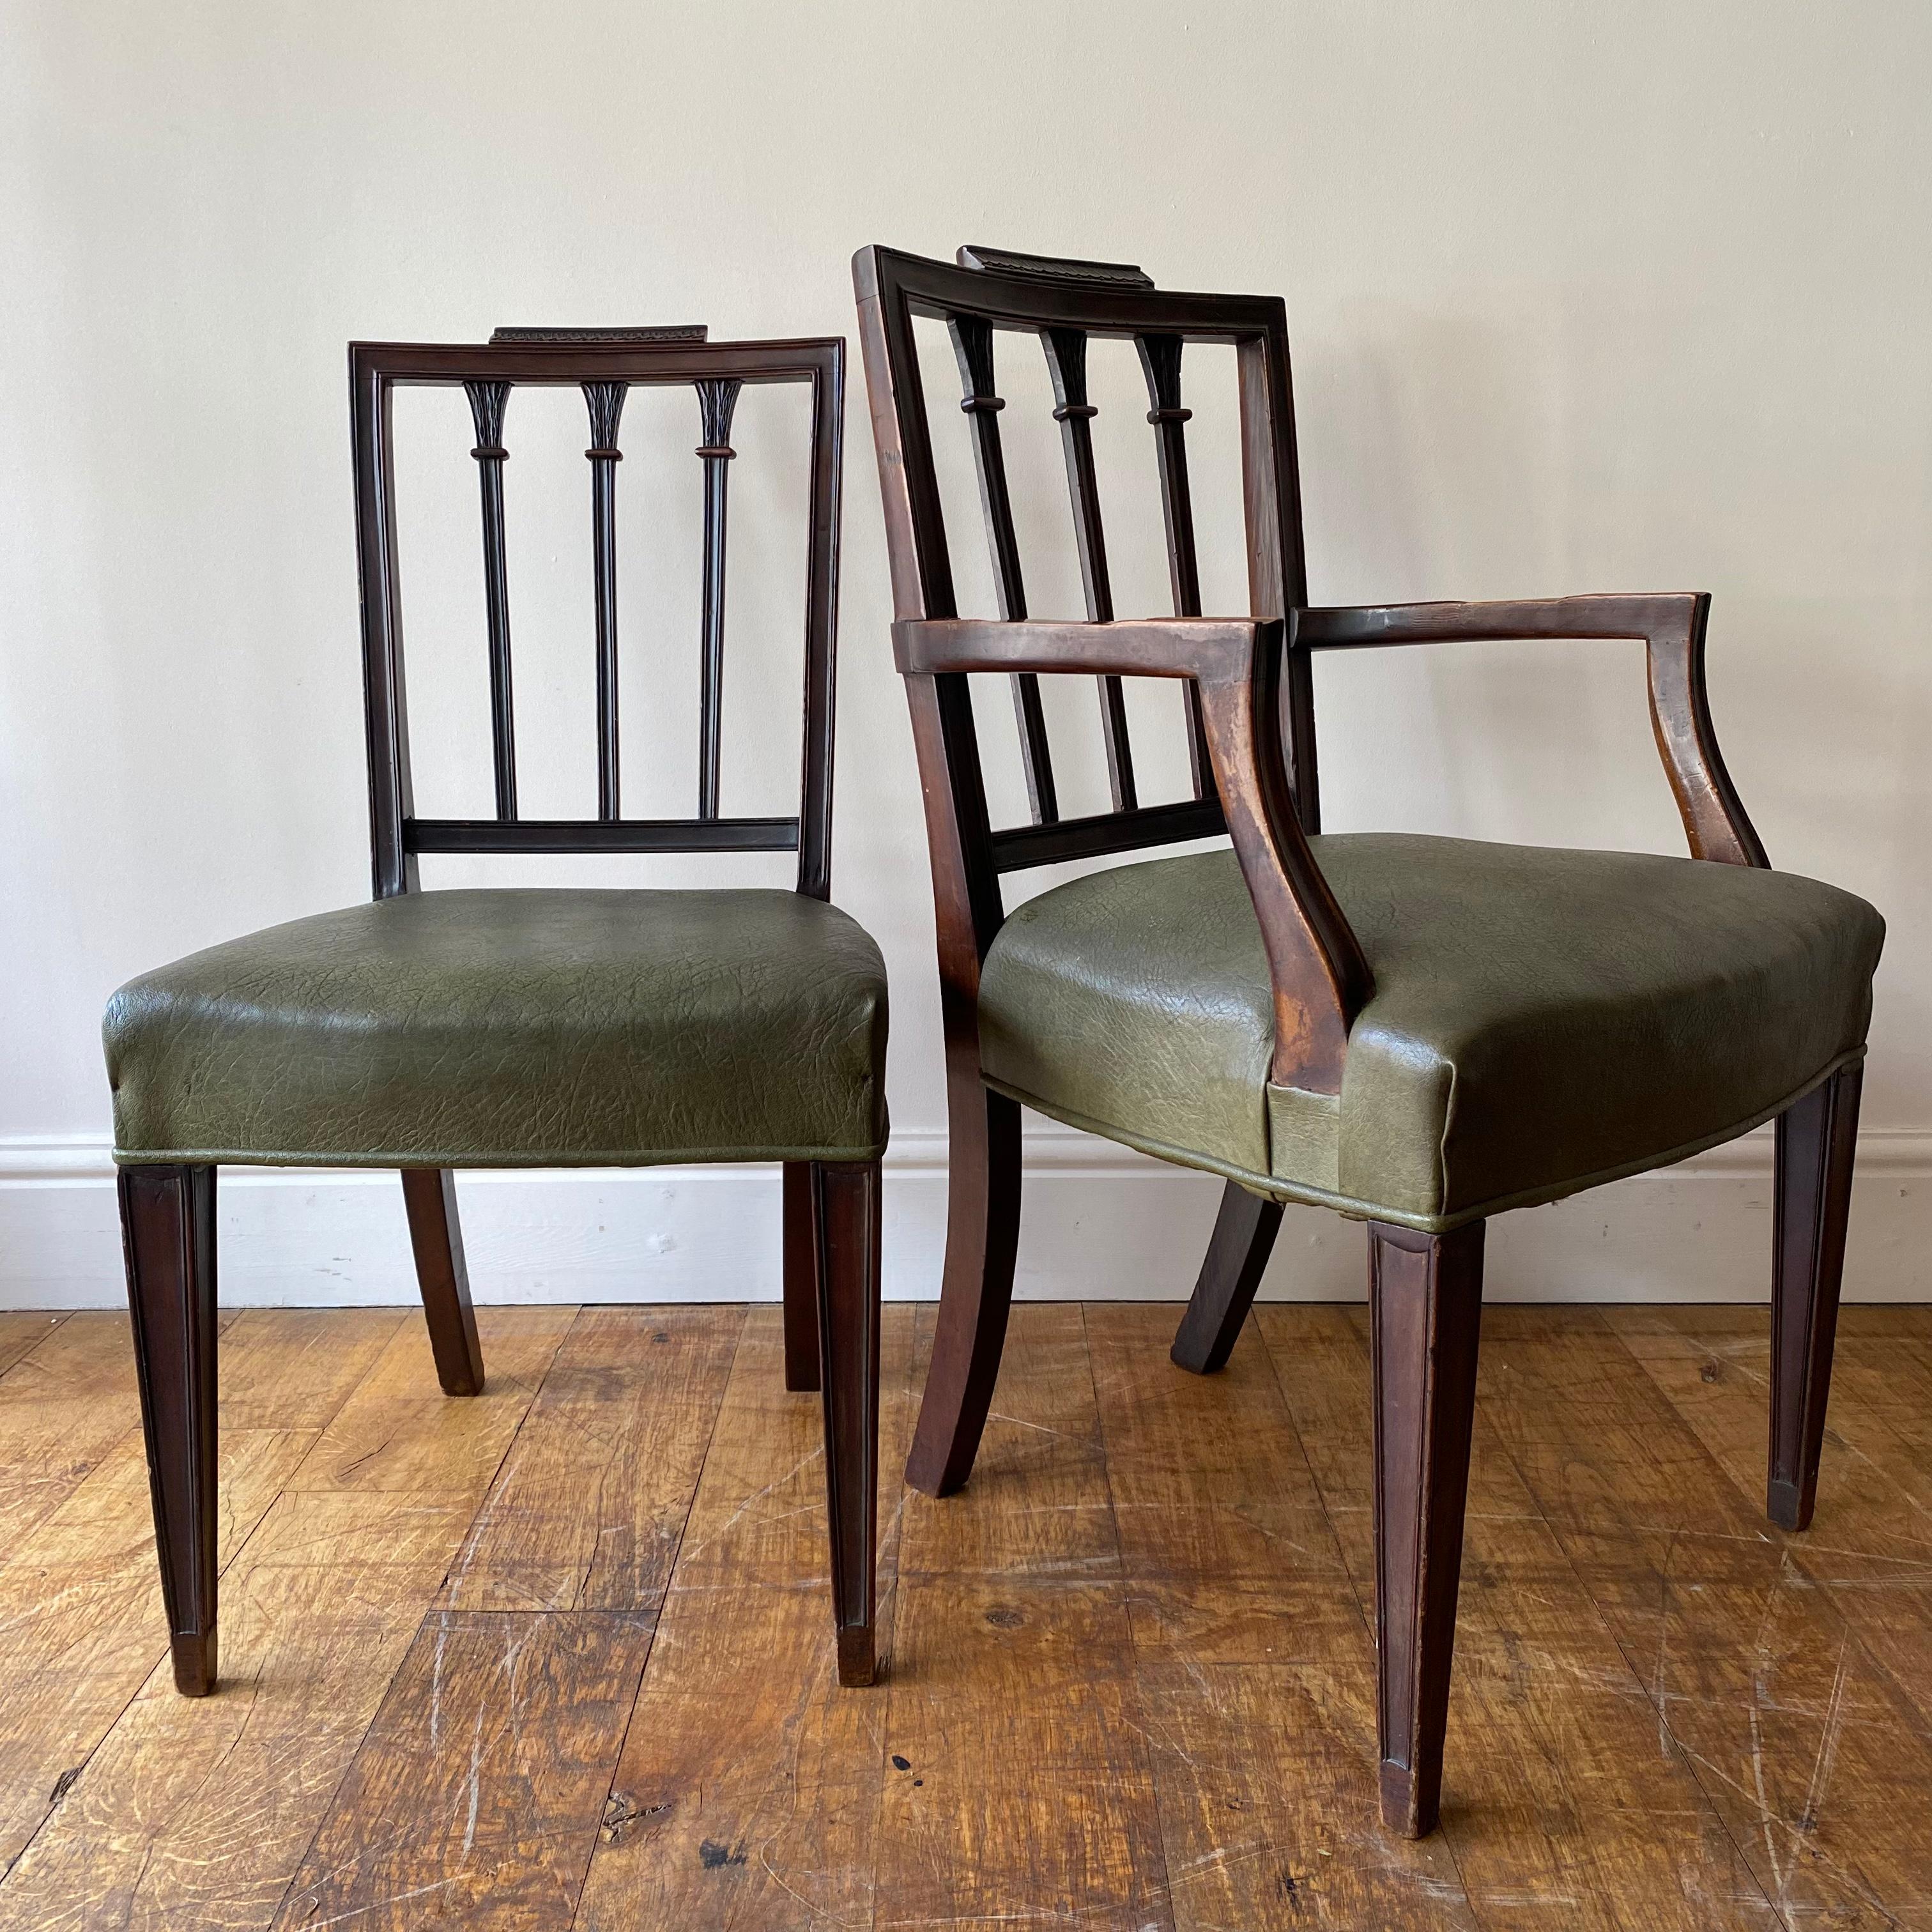 A set of 8 Sheraton period dining chairs consisting 6 side chairs and 2 carvers with later green leather upholstery.

Very heavy, substantial chairs of excellent quality. 

English, circa 1810.

Seat height: 47cm.

Other measurements were